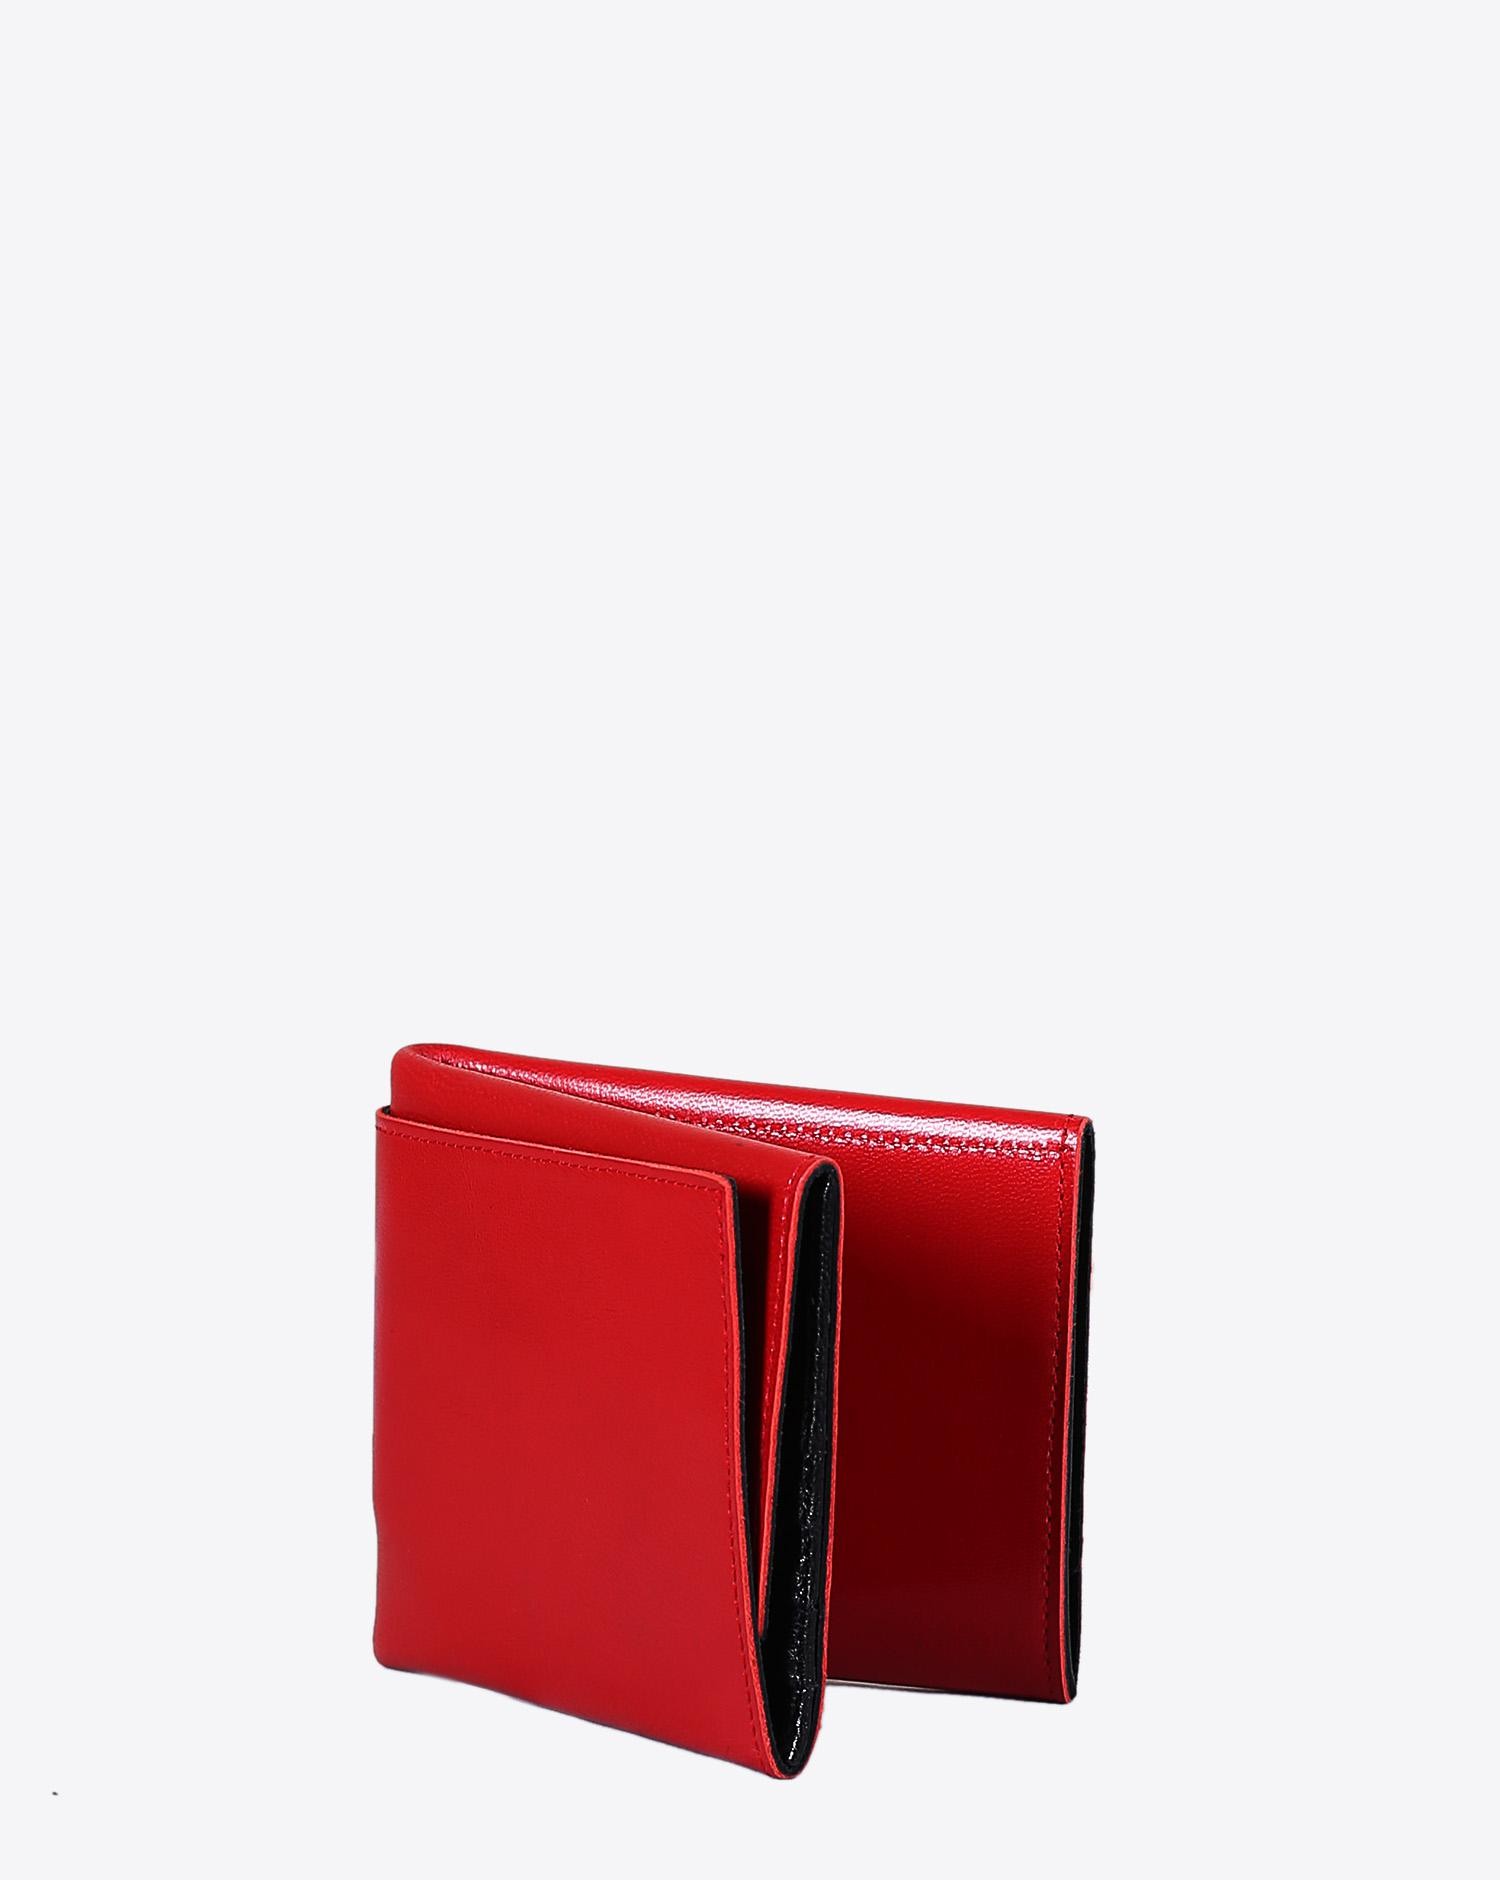 Marie Turnor Origami Wallet - Red Black  